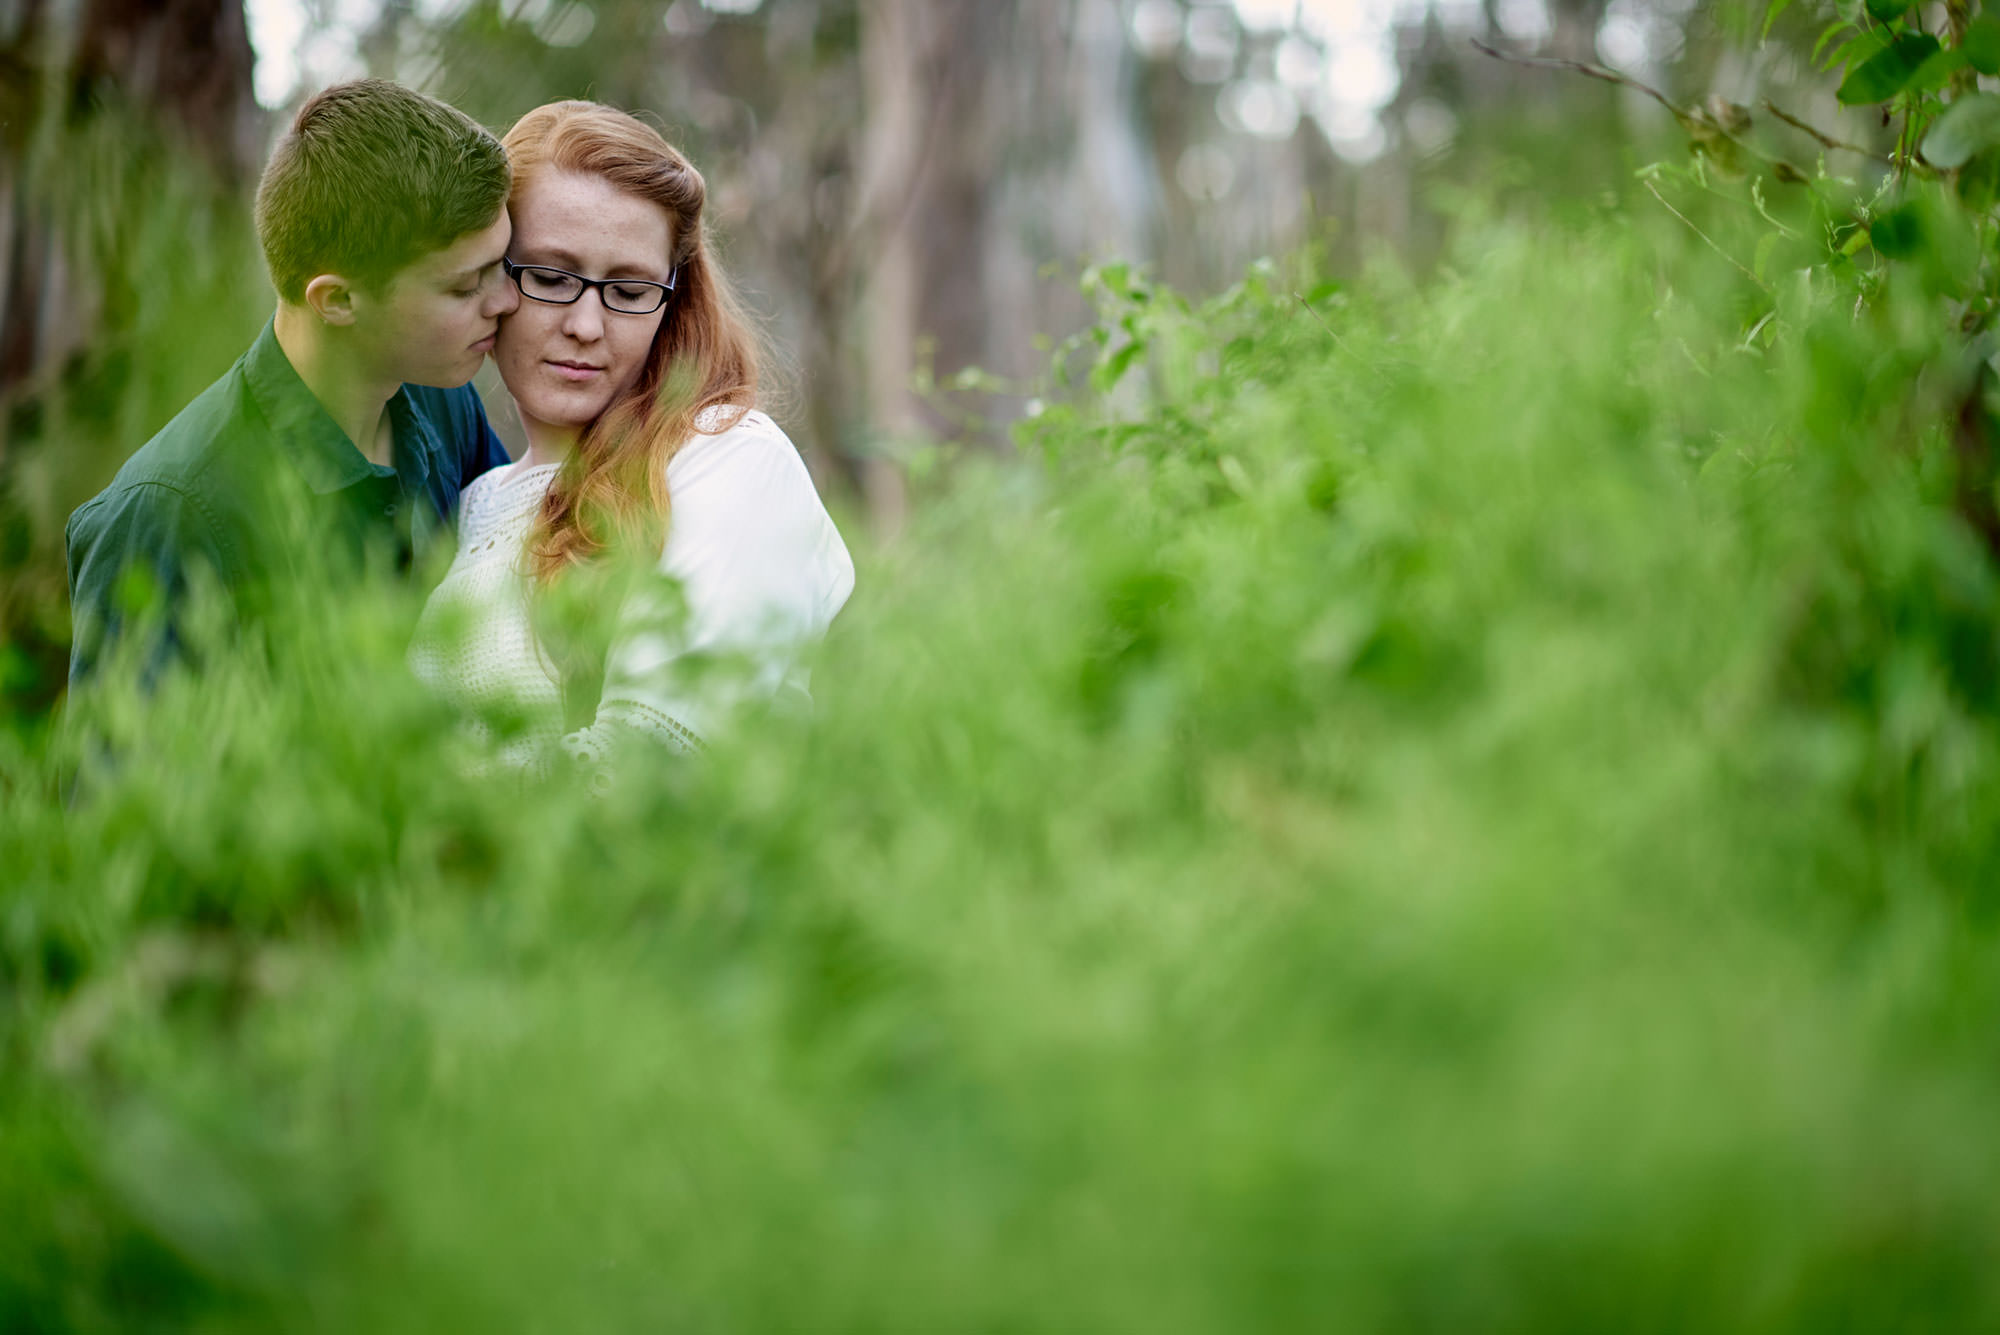 Brandon and Nikita's Engagement session at Nurragingy Reserve